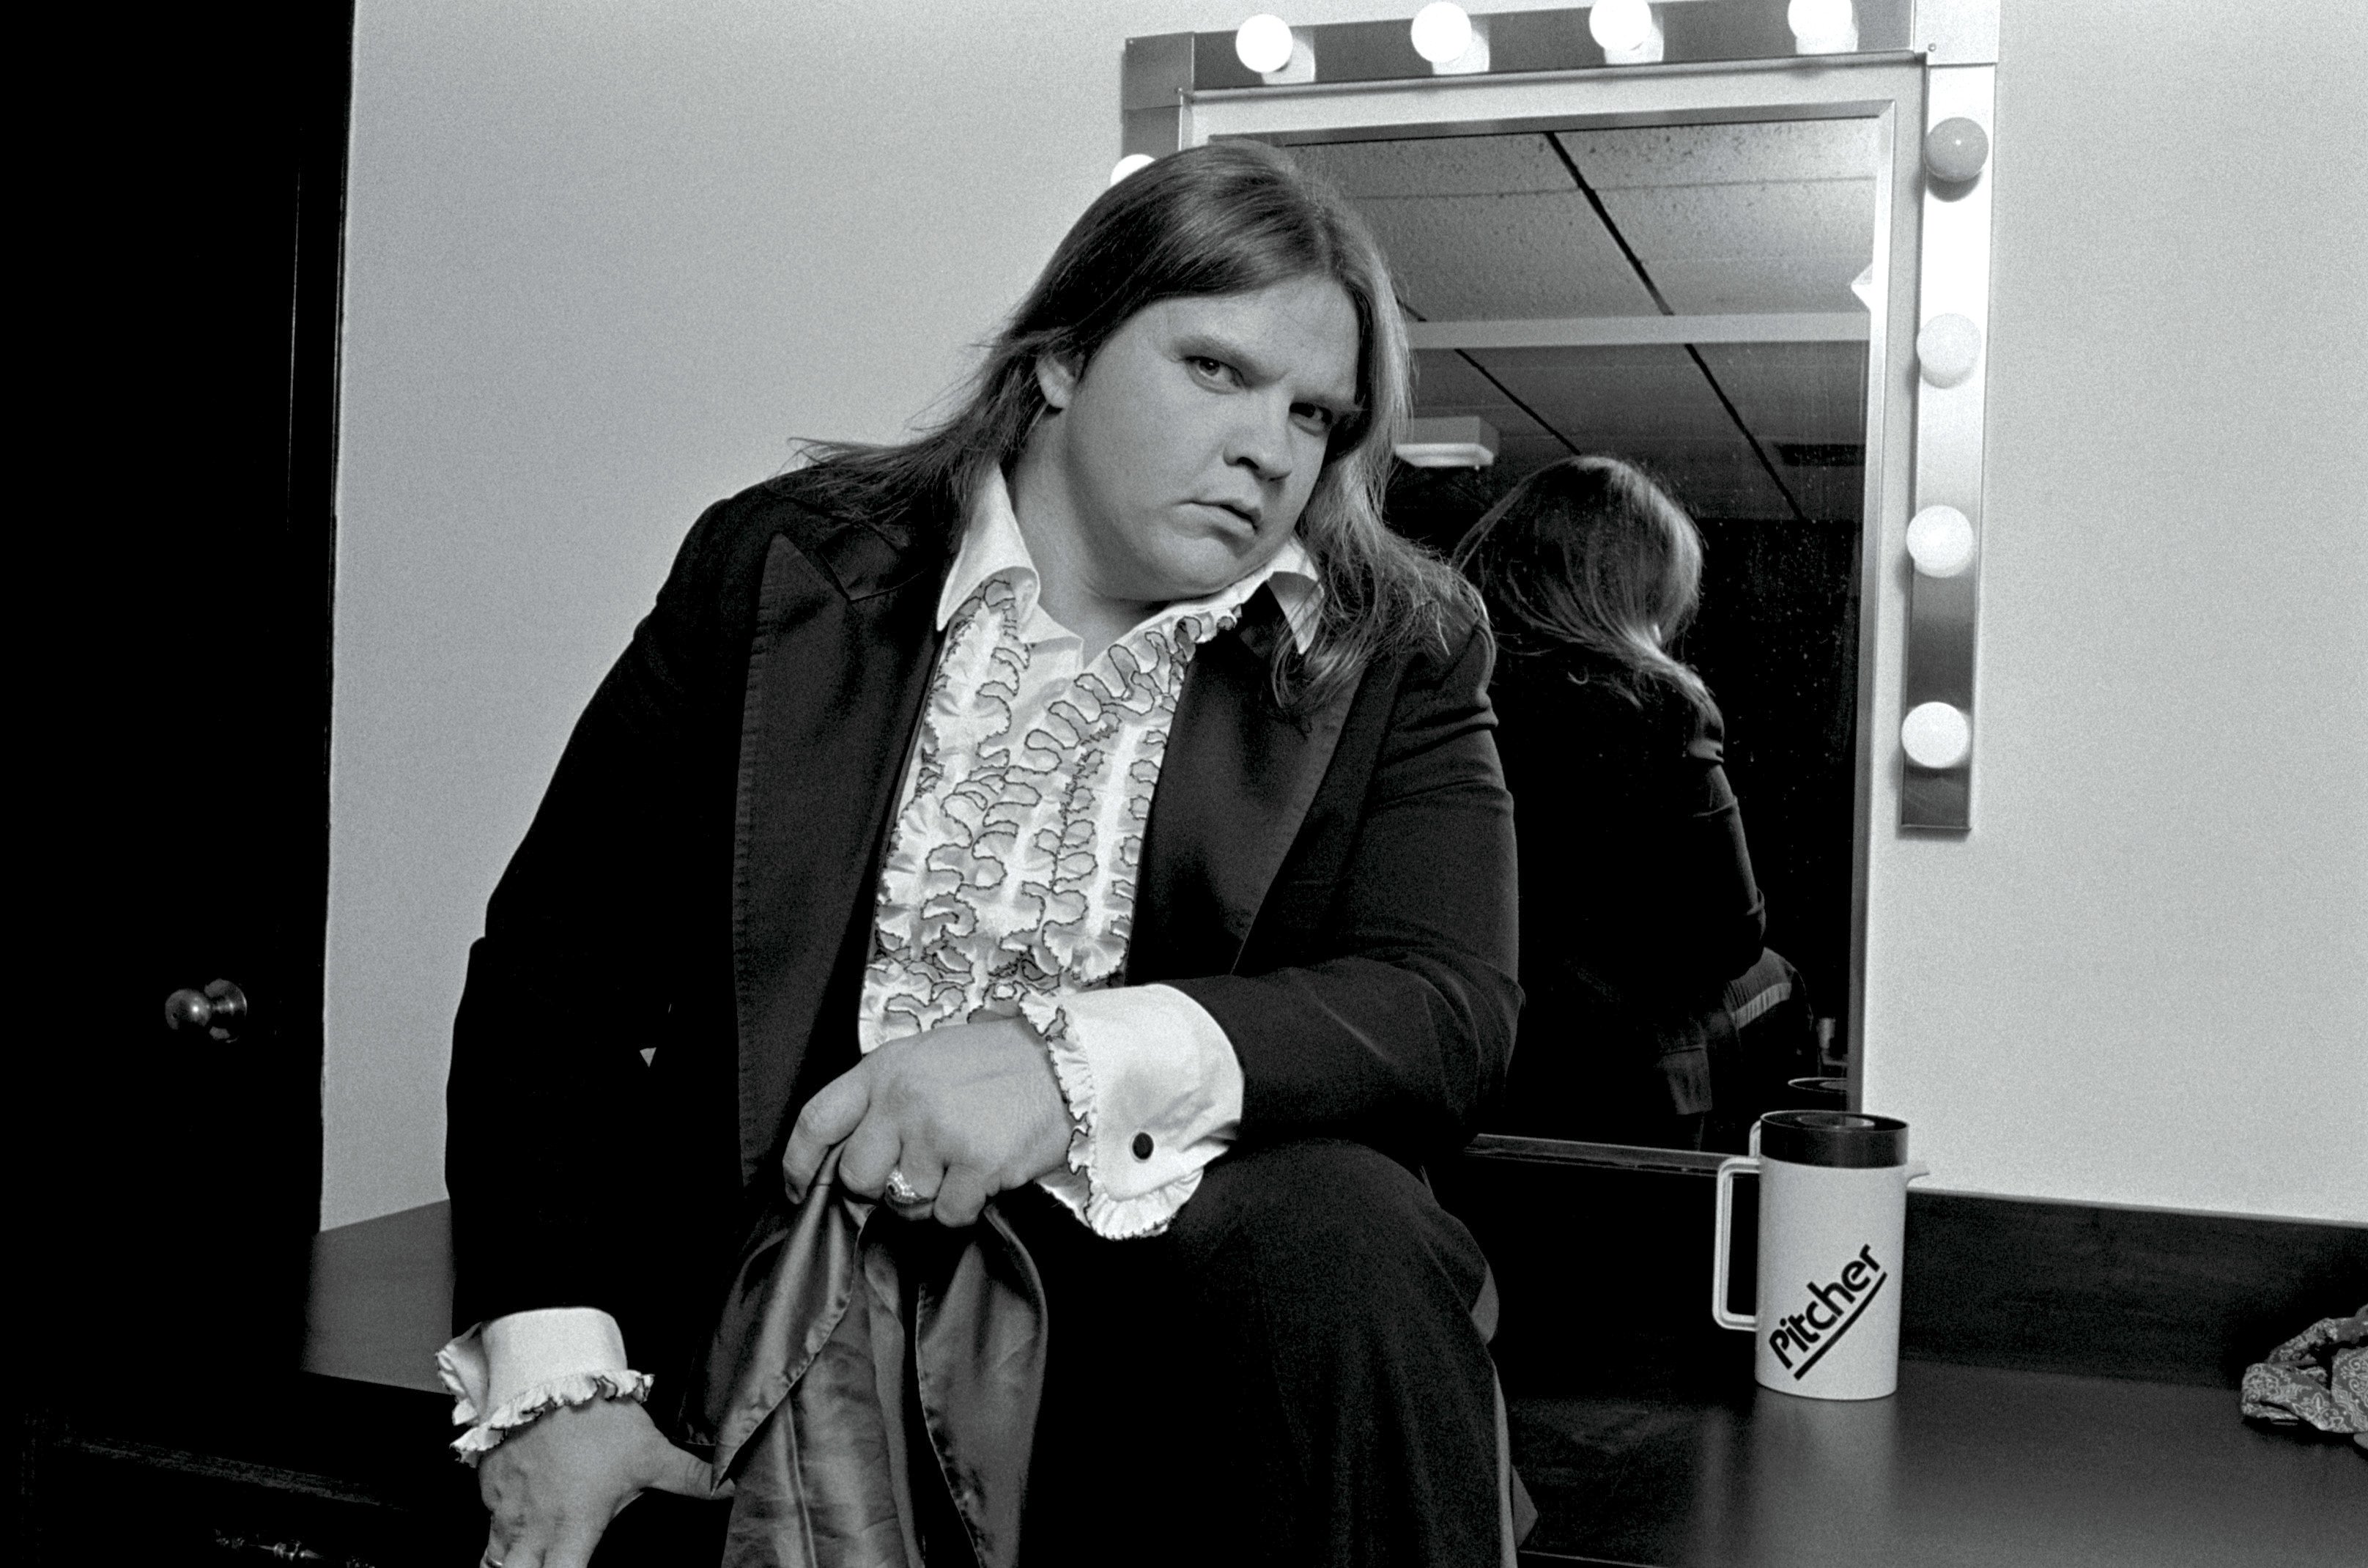 Meat Loaf in front of a mirror